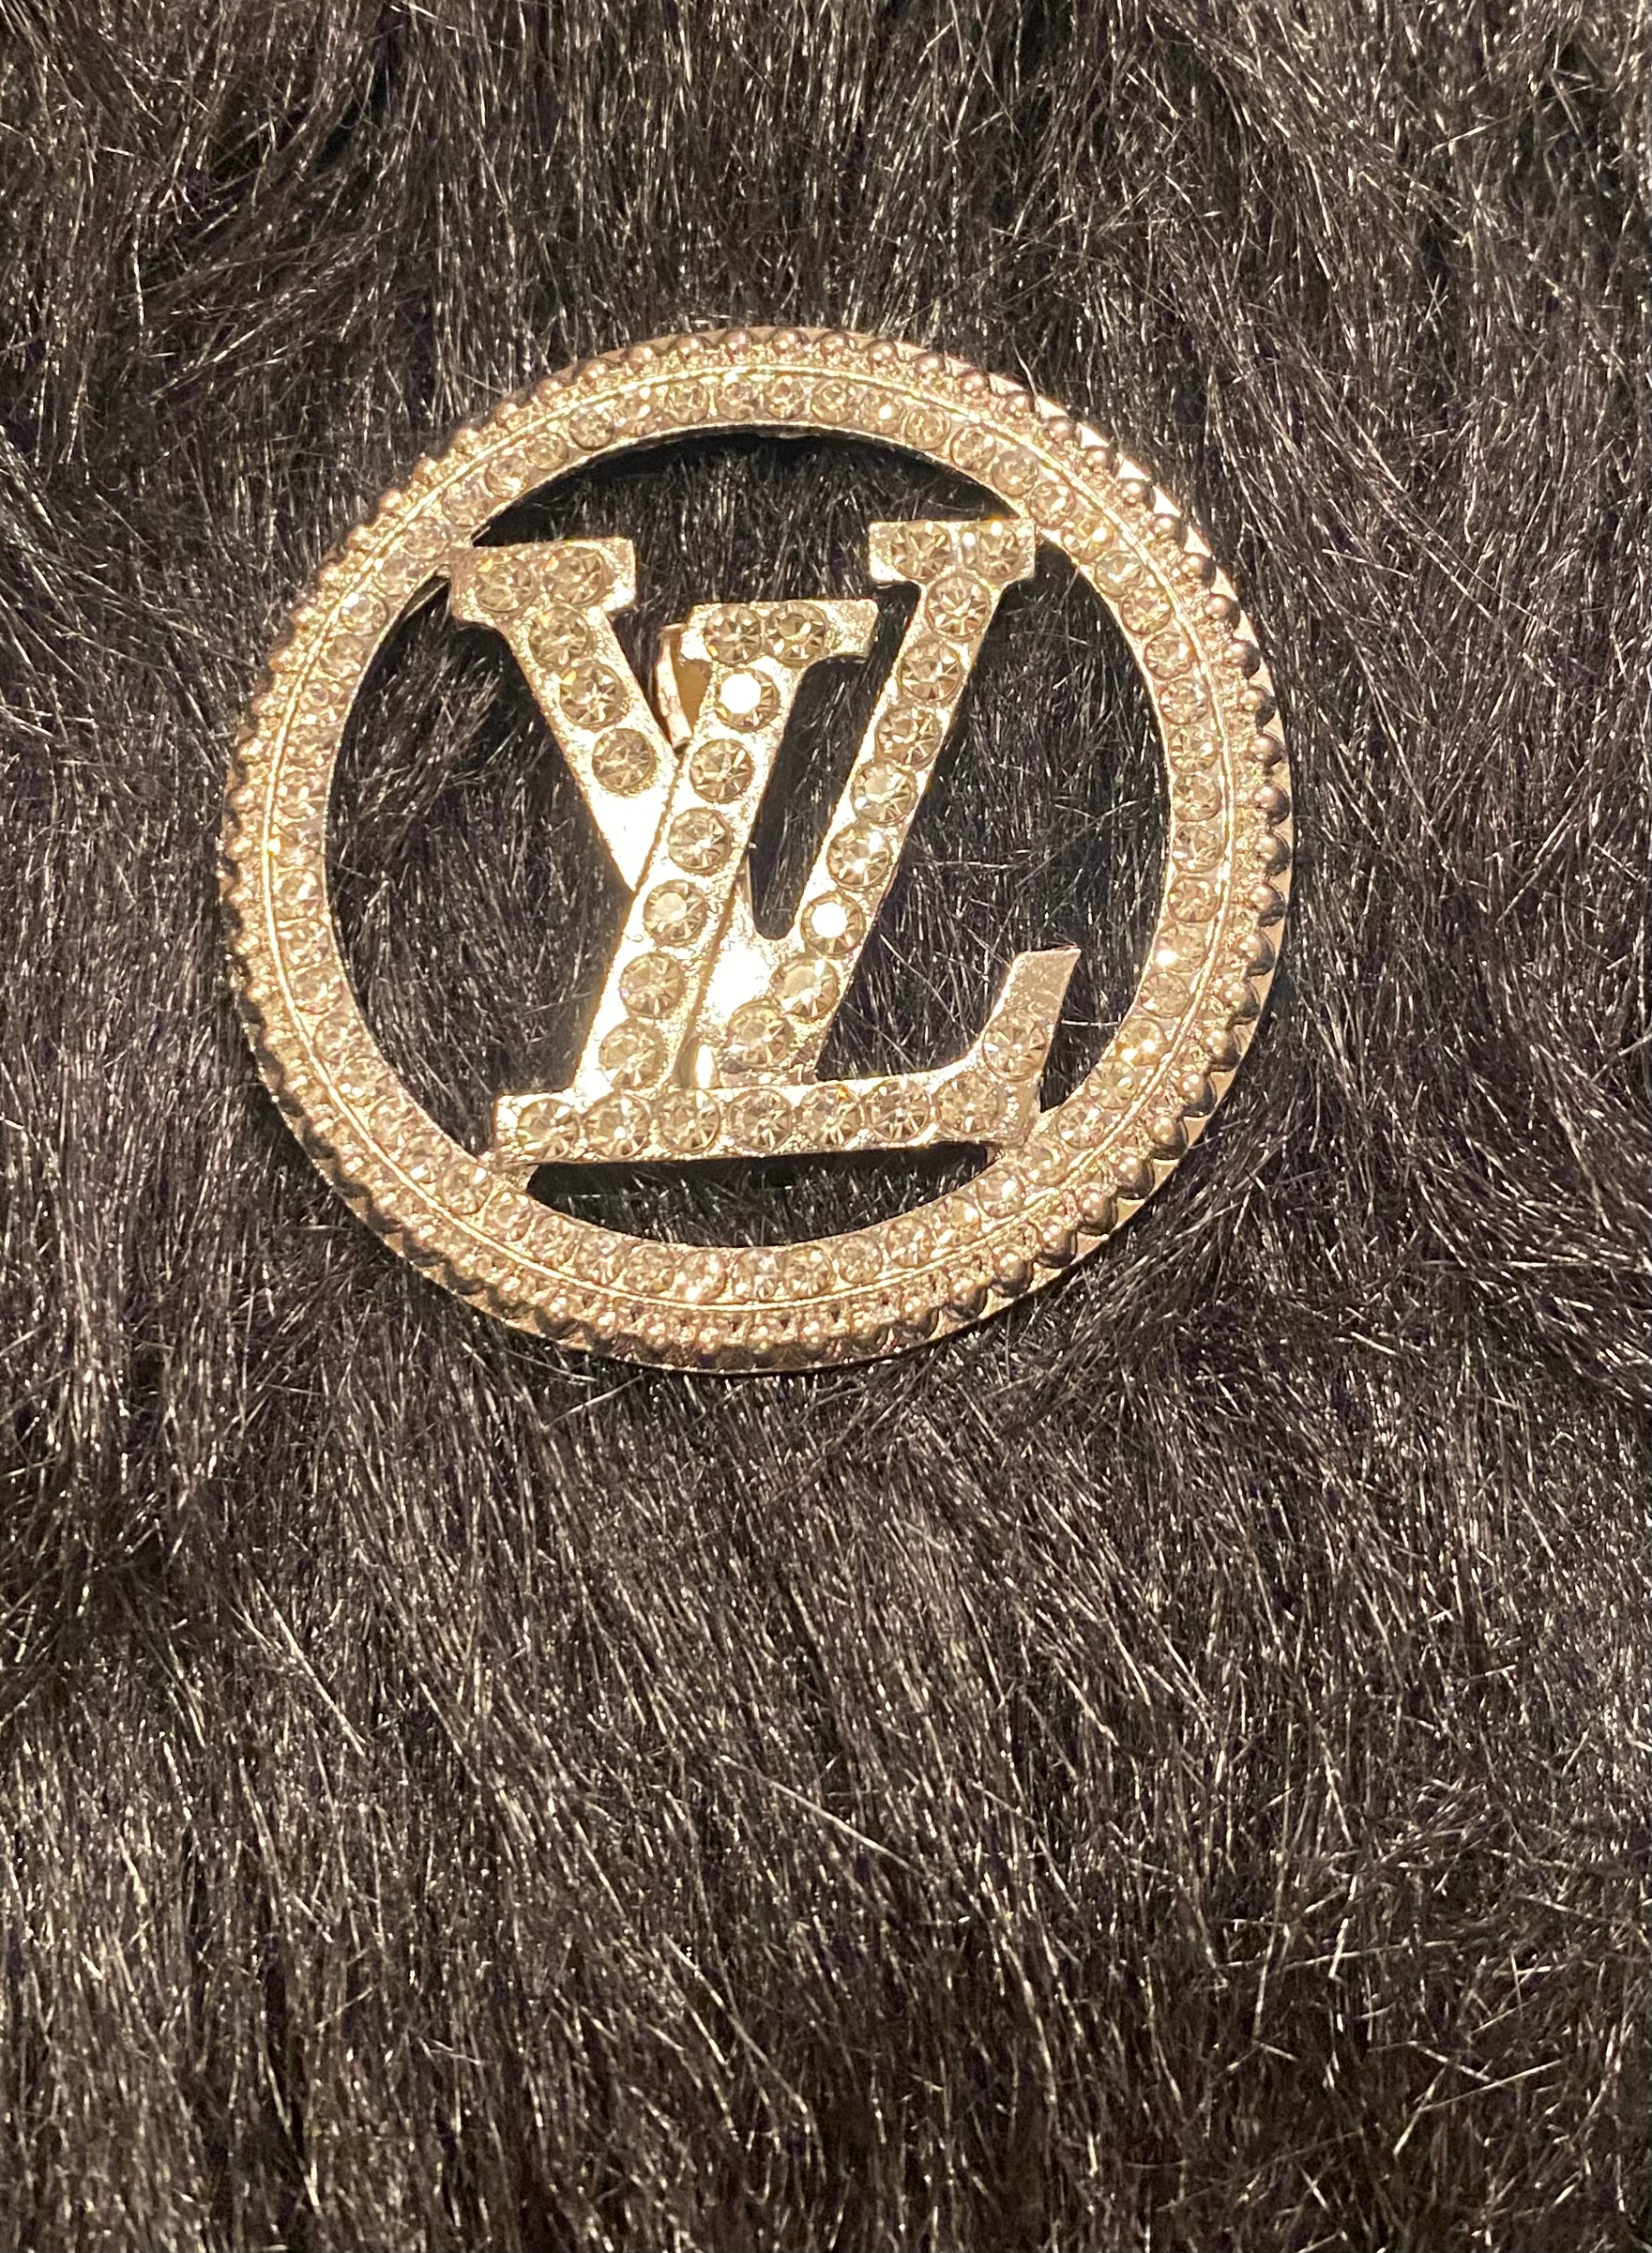 Louis Vuitton That's Love LVOE Brooch – myfirstshopifystore.com